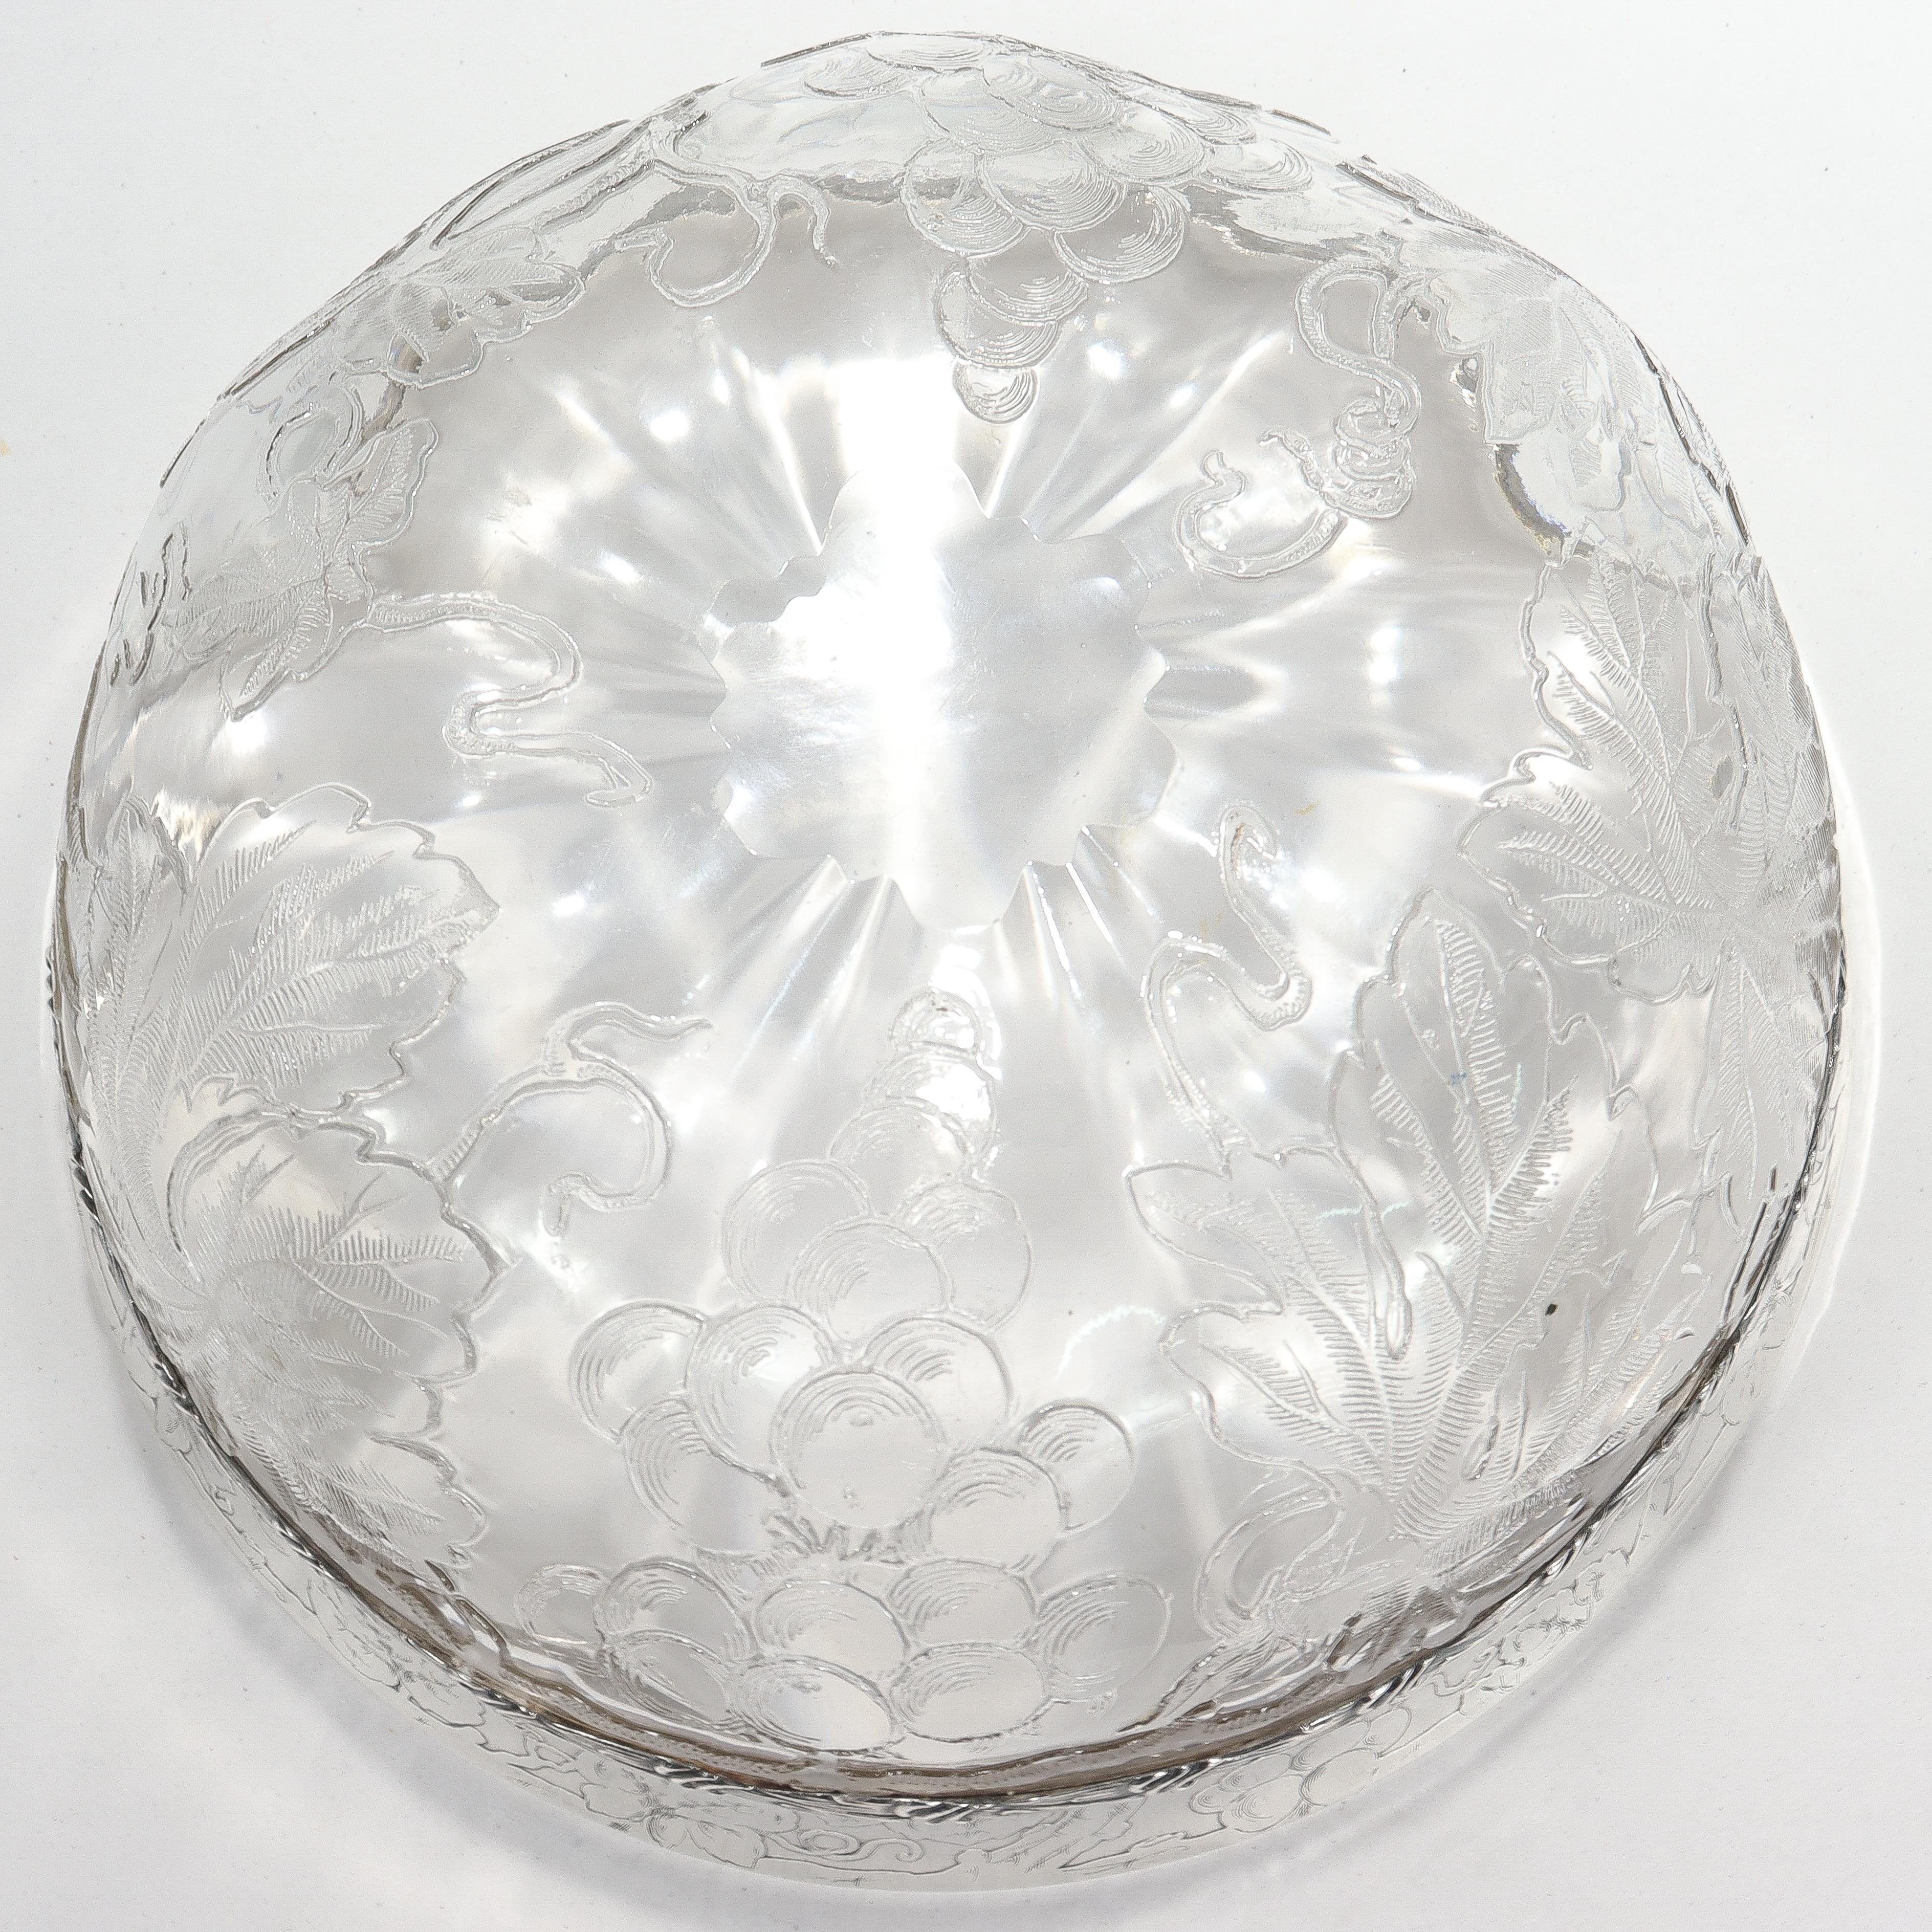 Antique Tiffany & Co. Sterling Silver Mounted 'Rock Crystal' Cut Glass Bowl 5